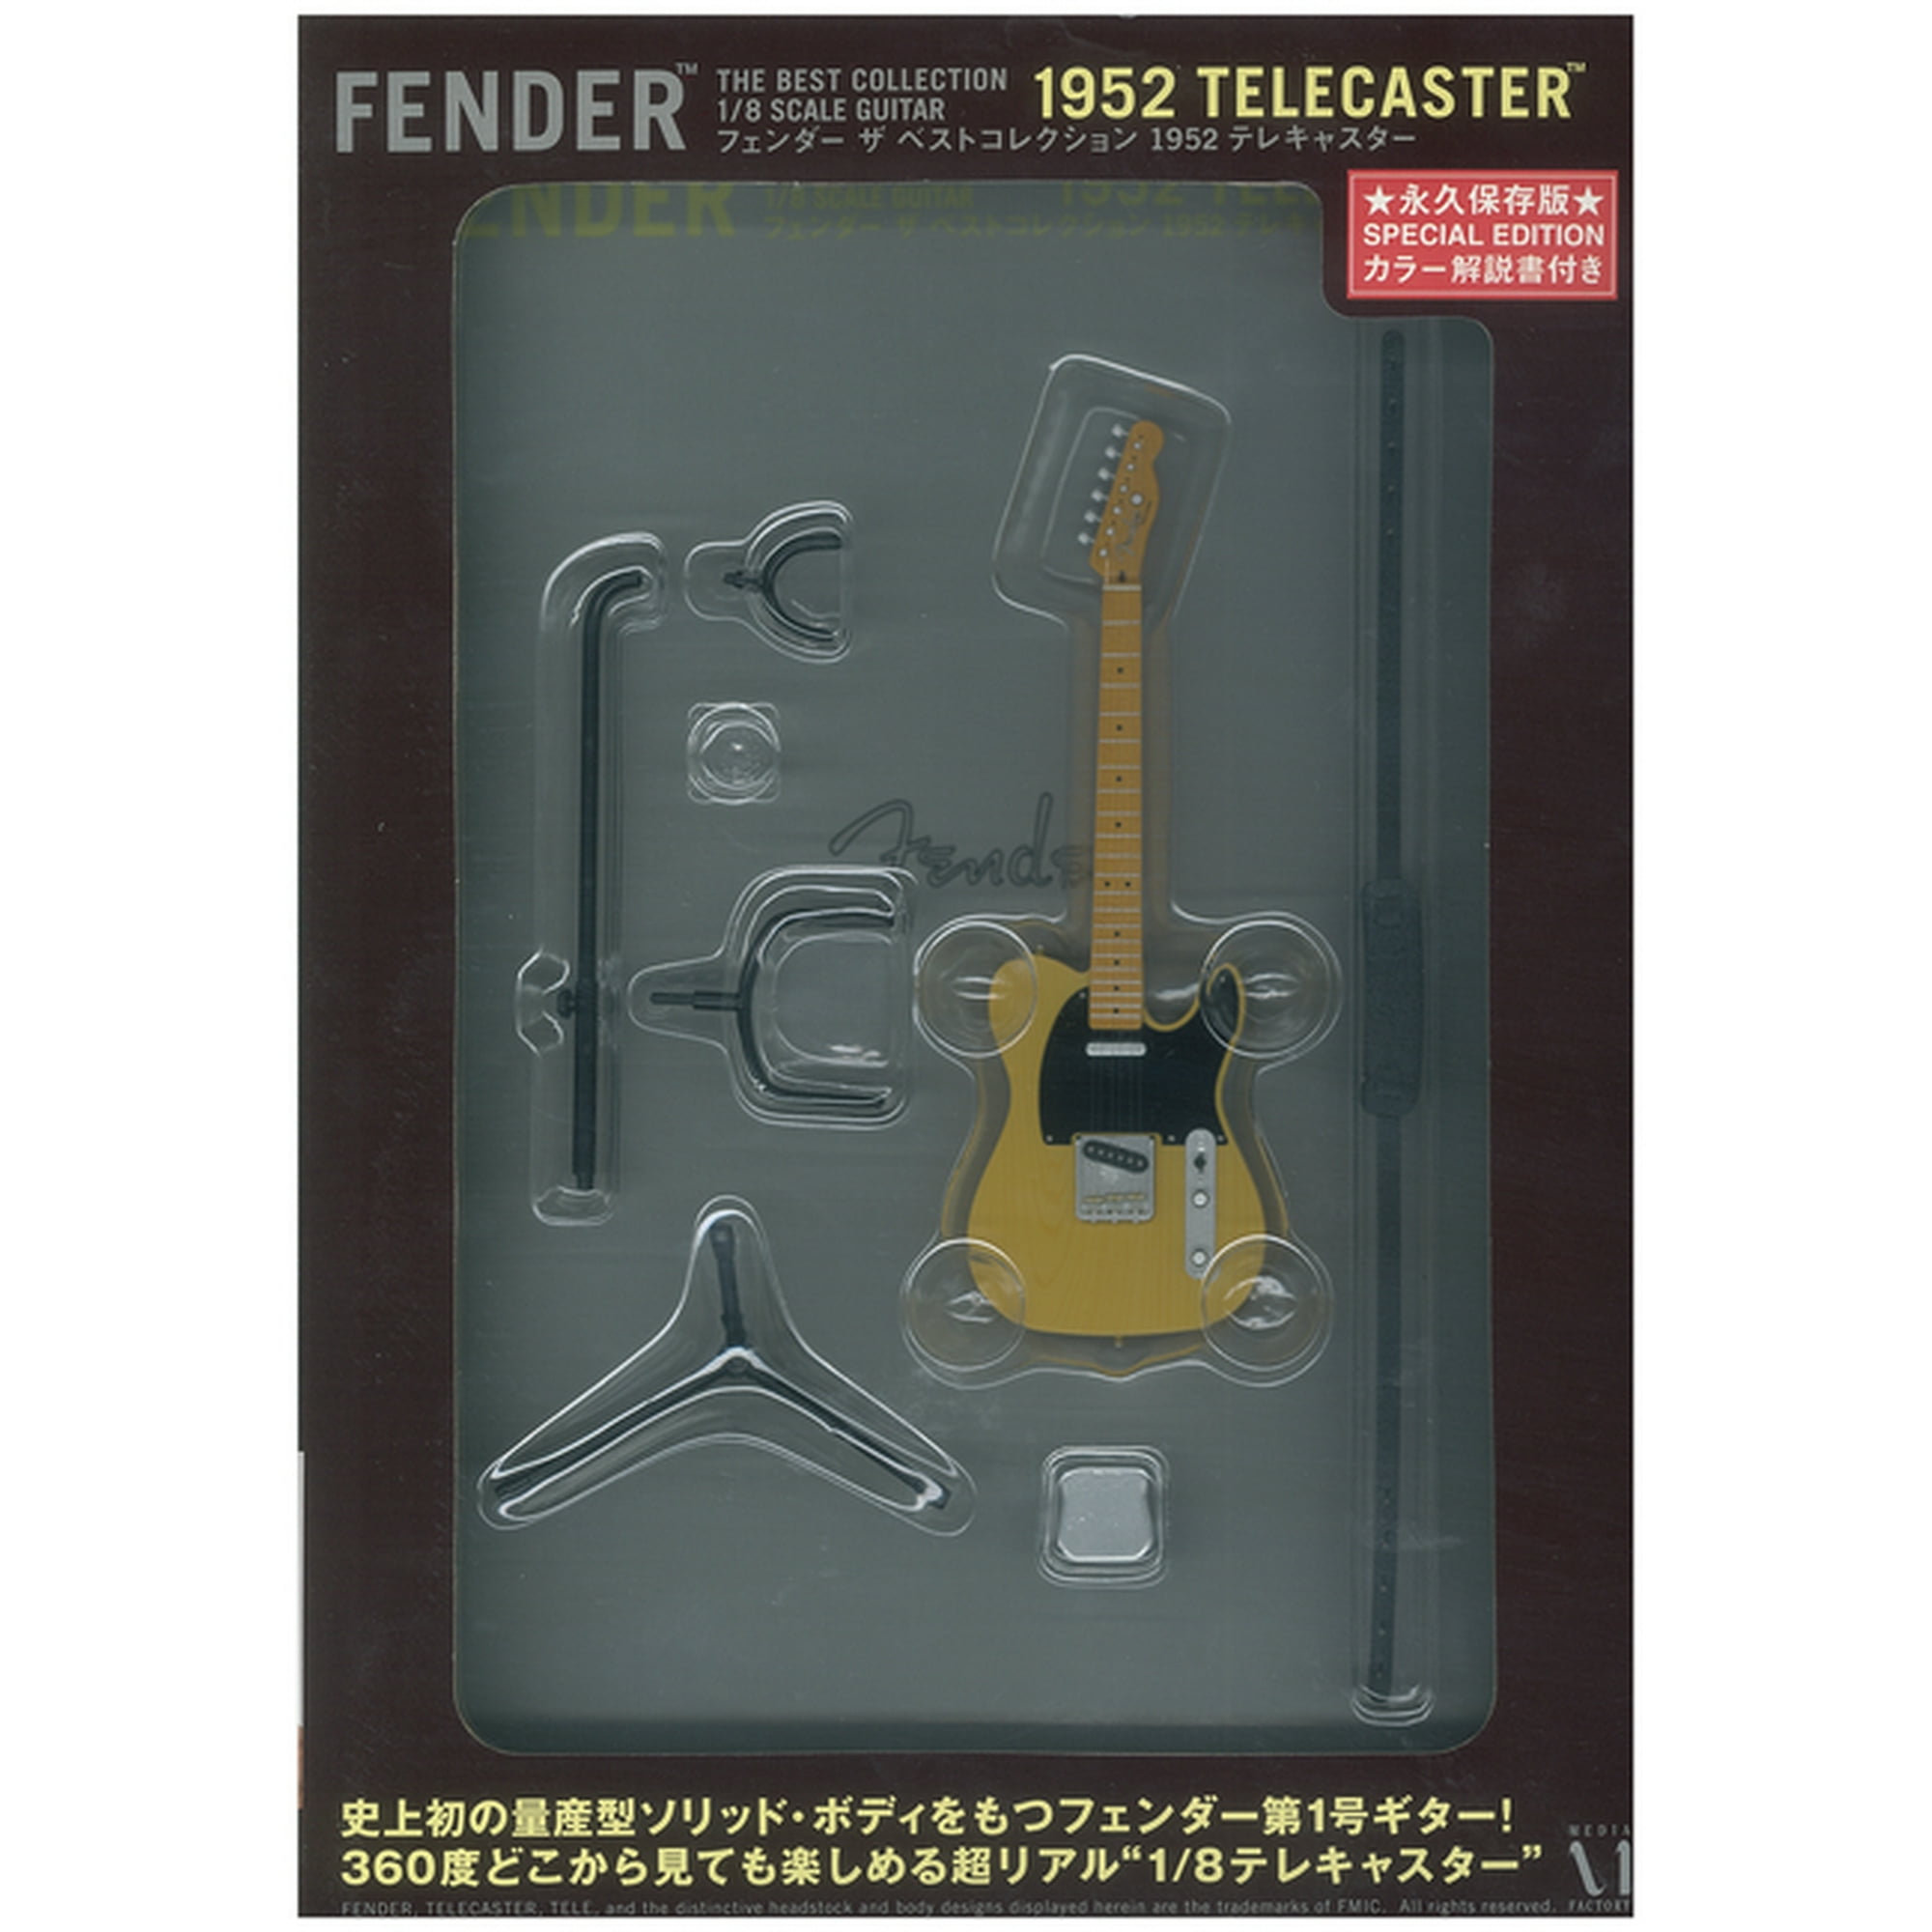 Guitar Legend: Fender the Best Collection 1952 Telecaster (Other  merchandise)